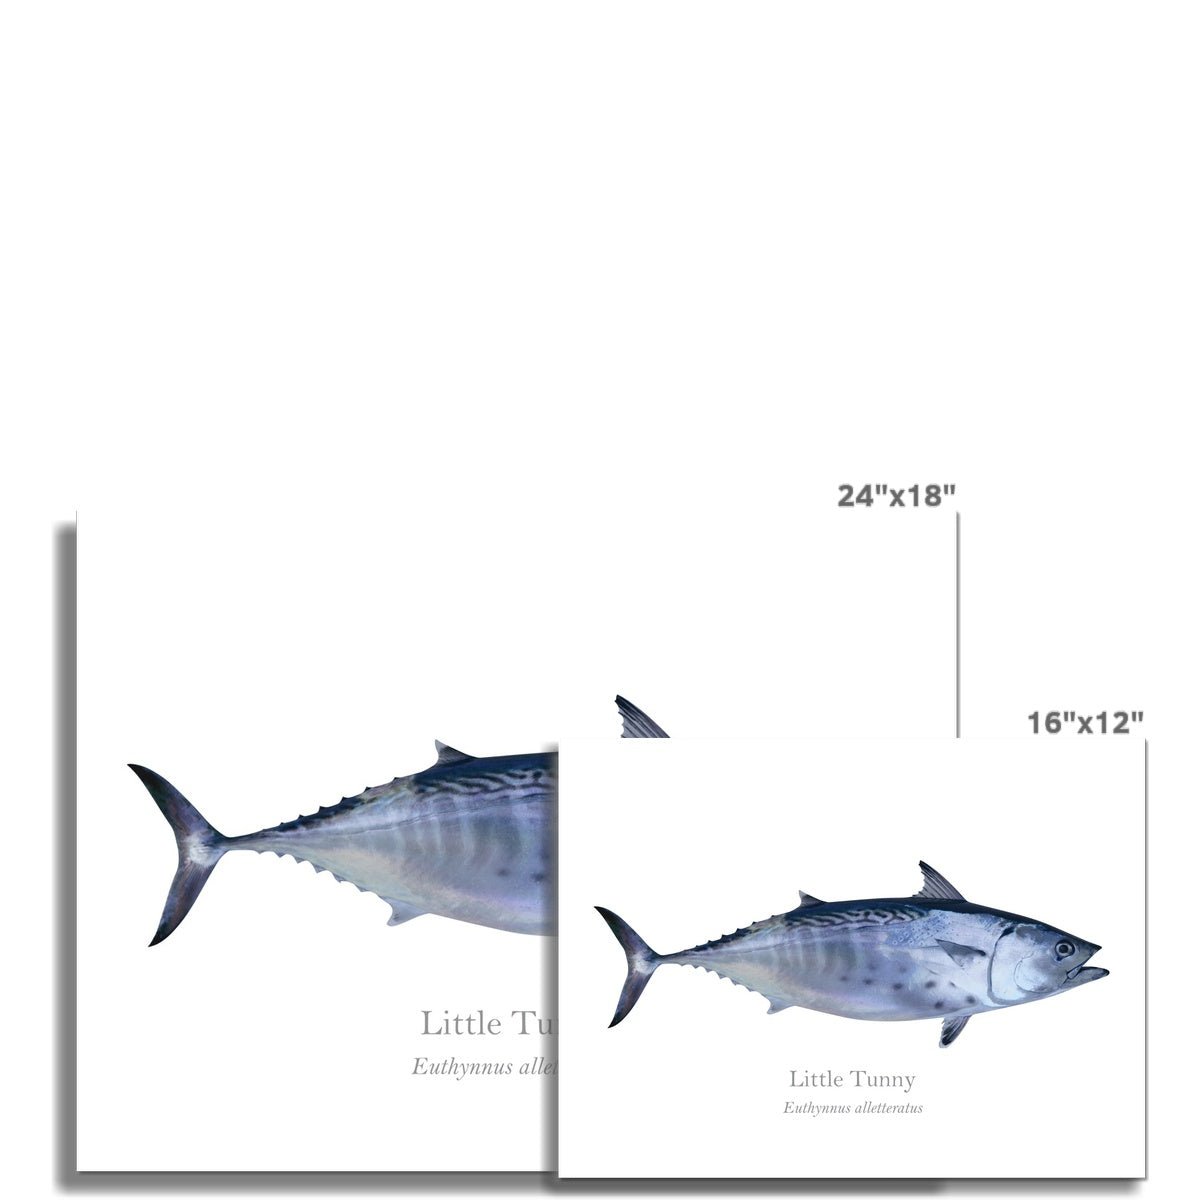 Little Tunny - Art Print - With Scientific Name - madfishlab.com